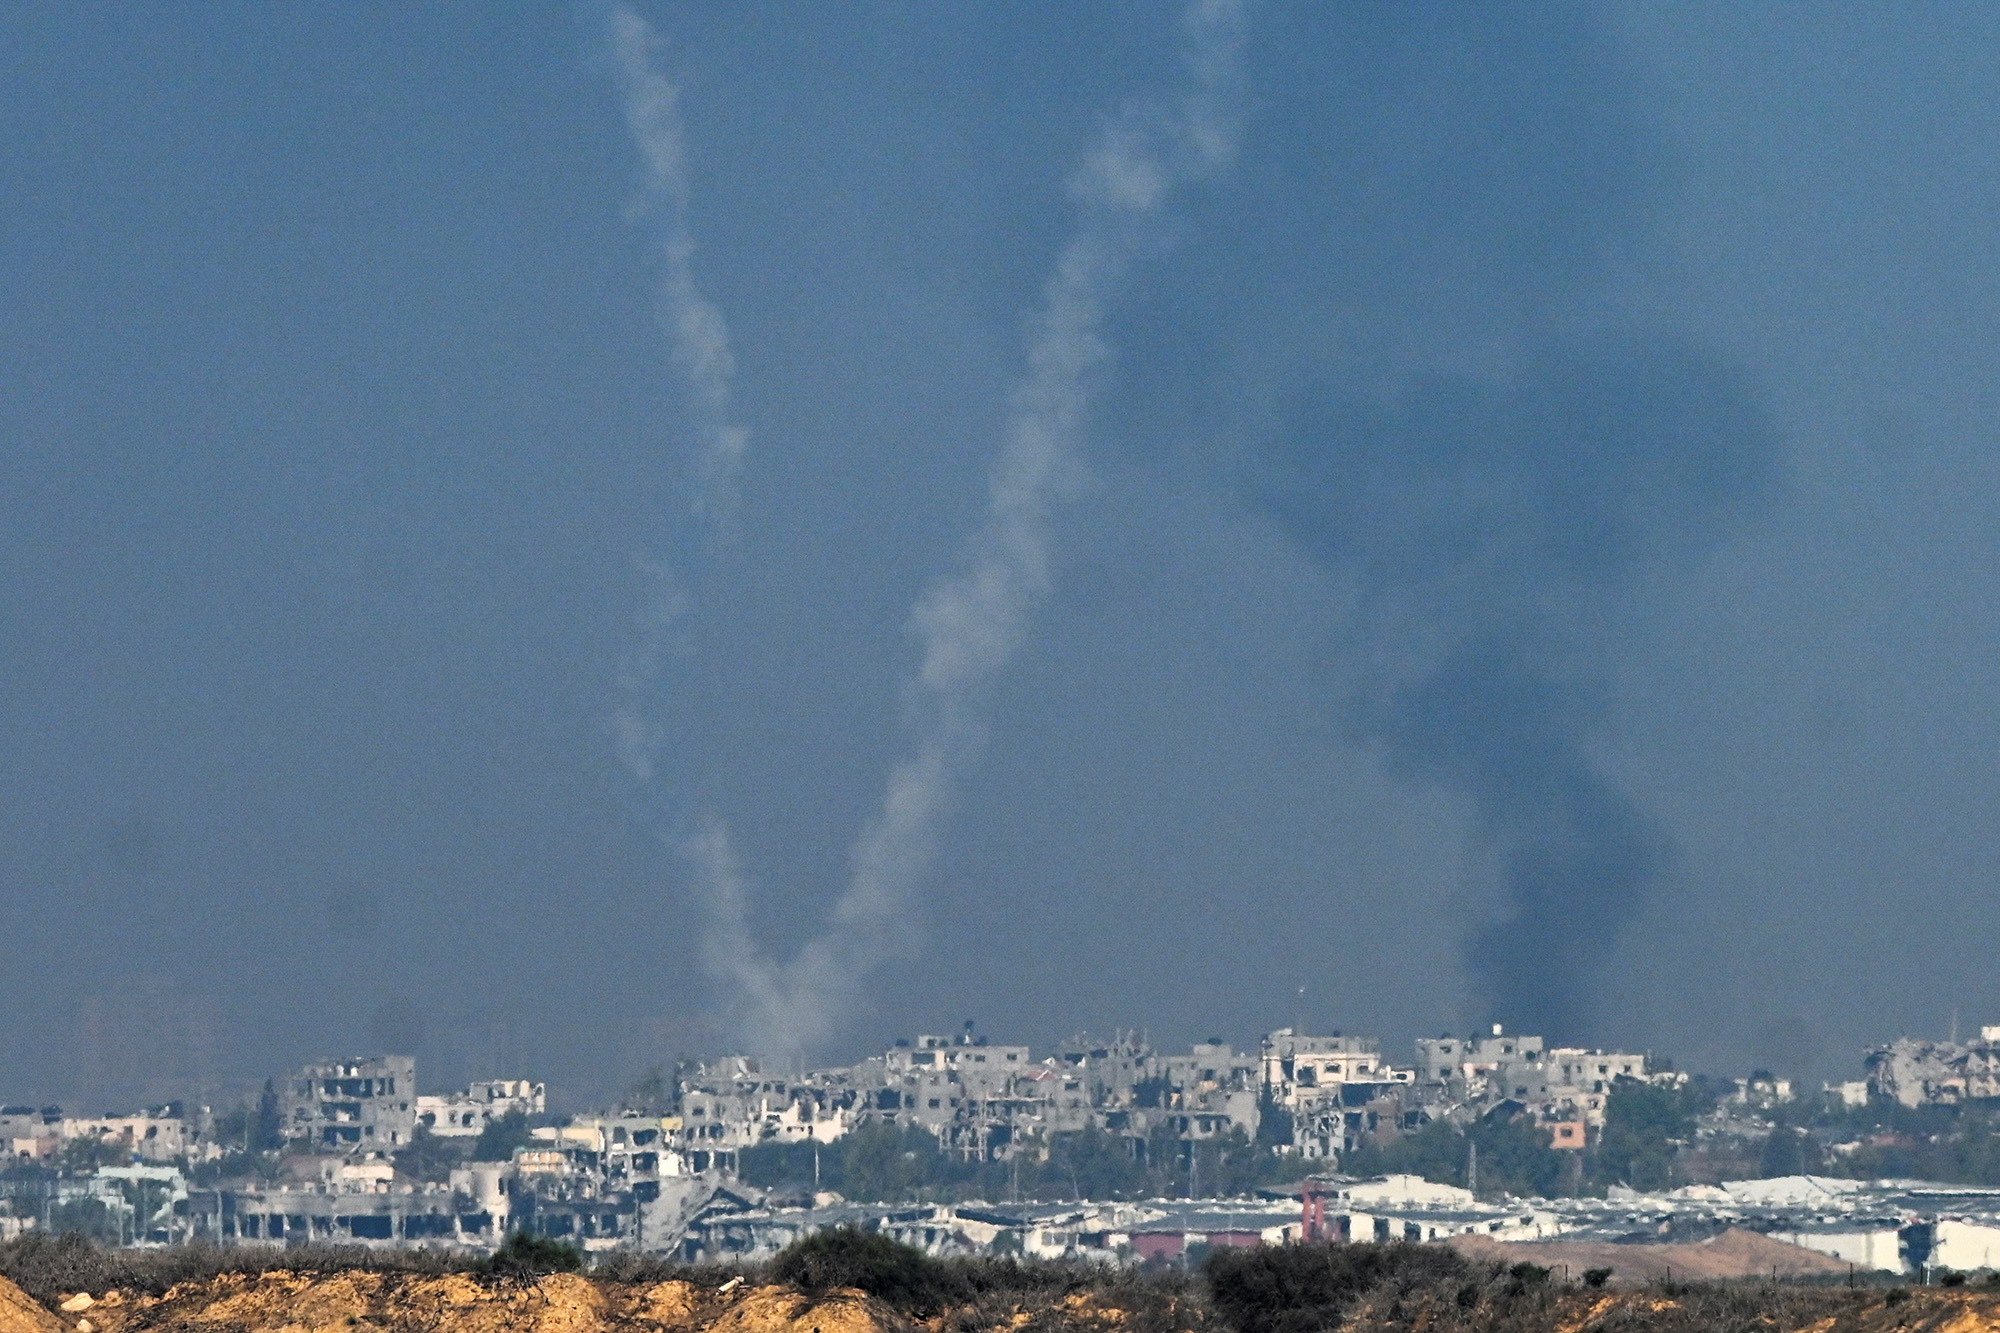 Rockets are launched from the Gaza Strip into Israel as seen from Israel's border with Gaza in southern Israel, on December 1.